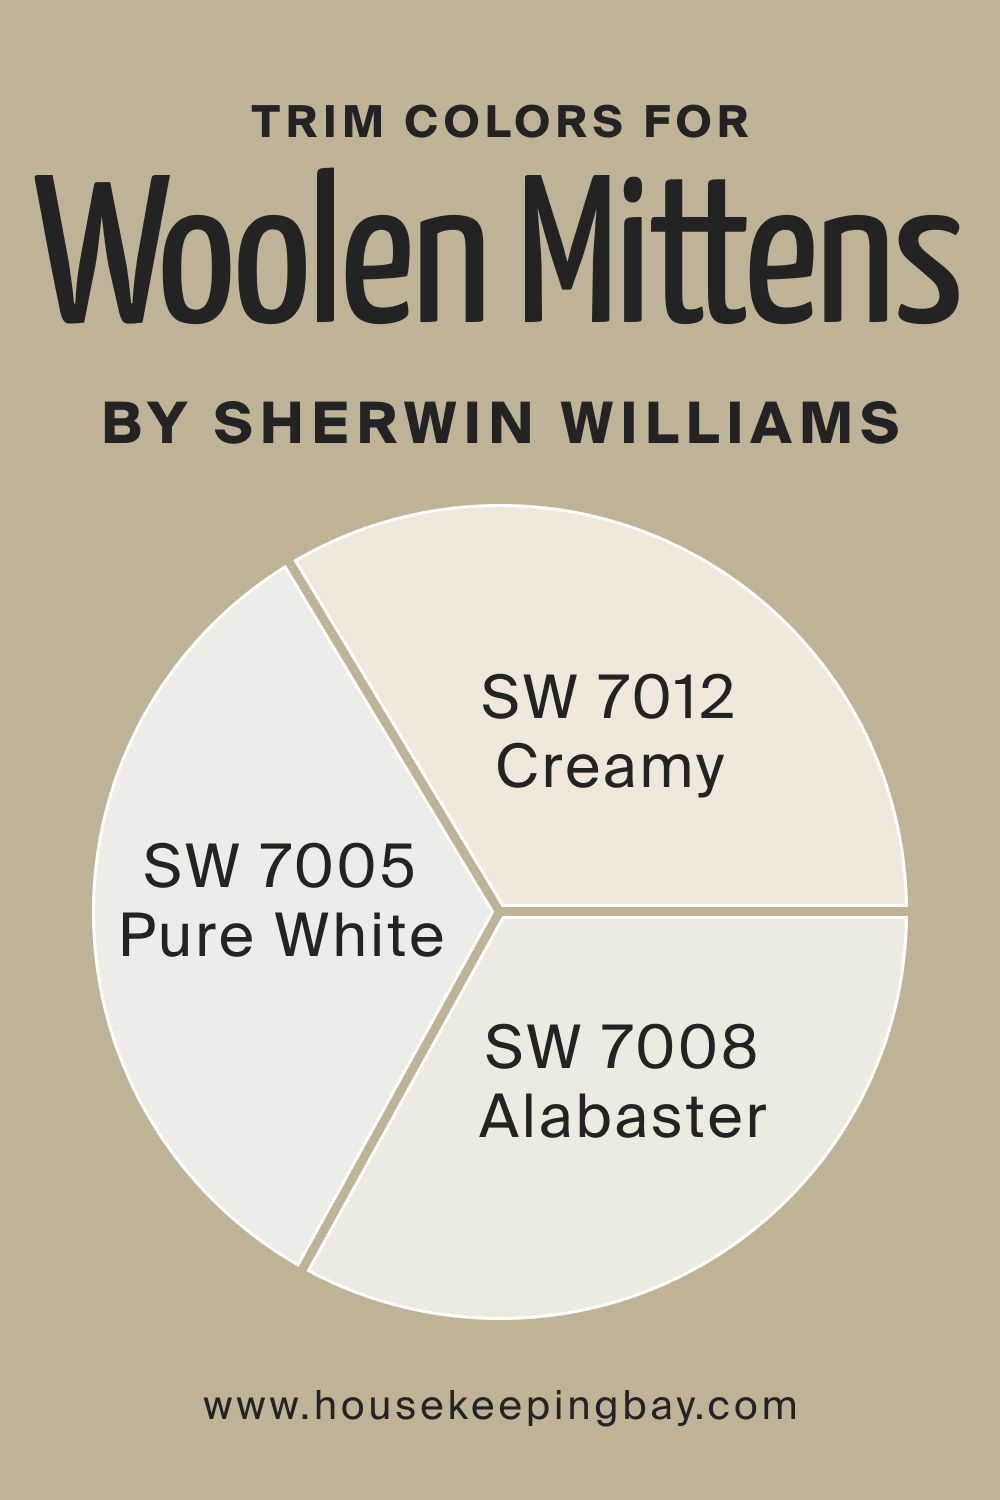 Trim Colors of SW 9526 Woolen Mittens by Sherwin Williams